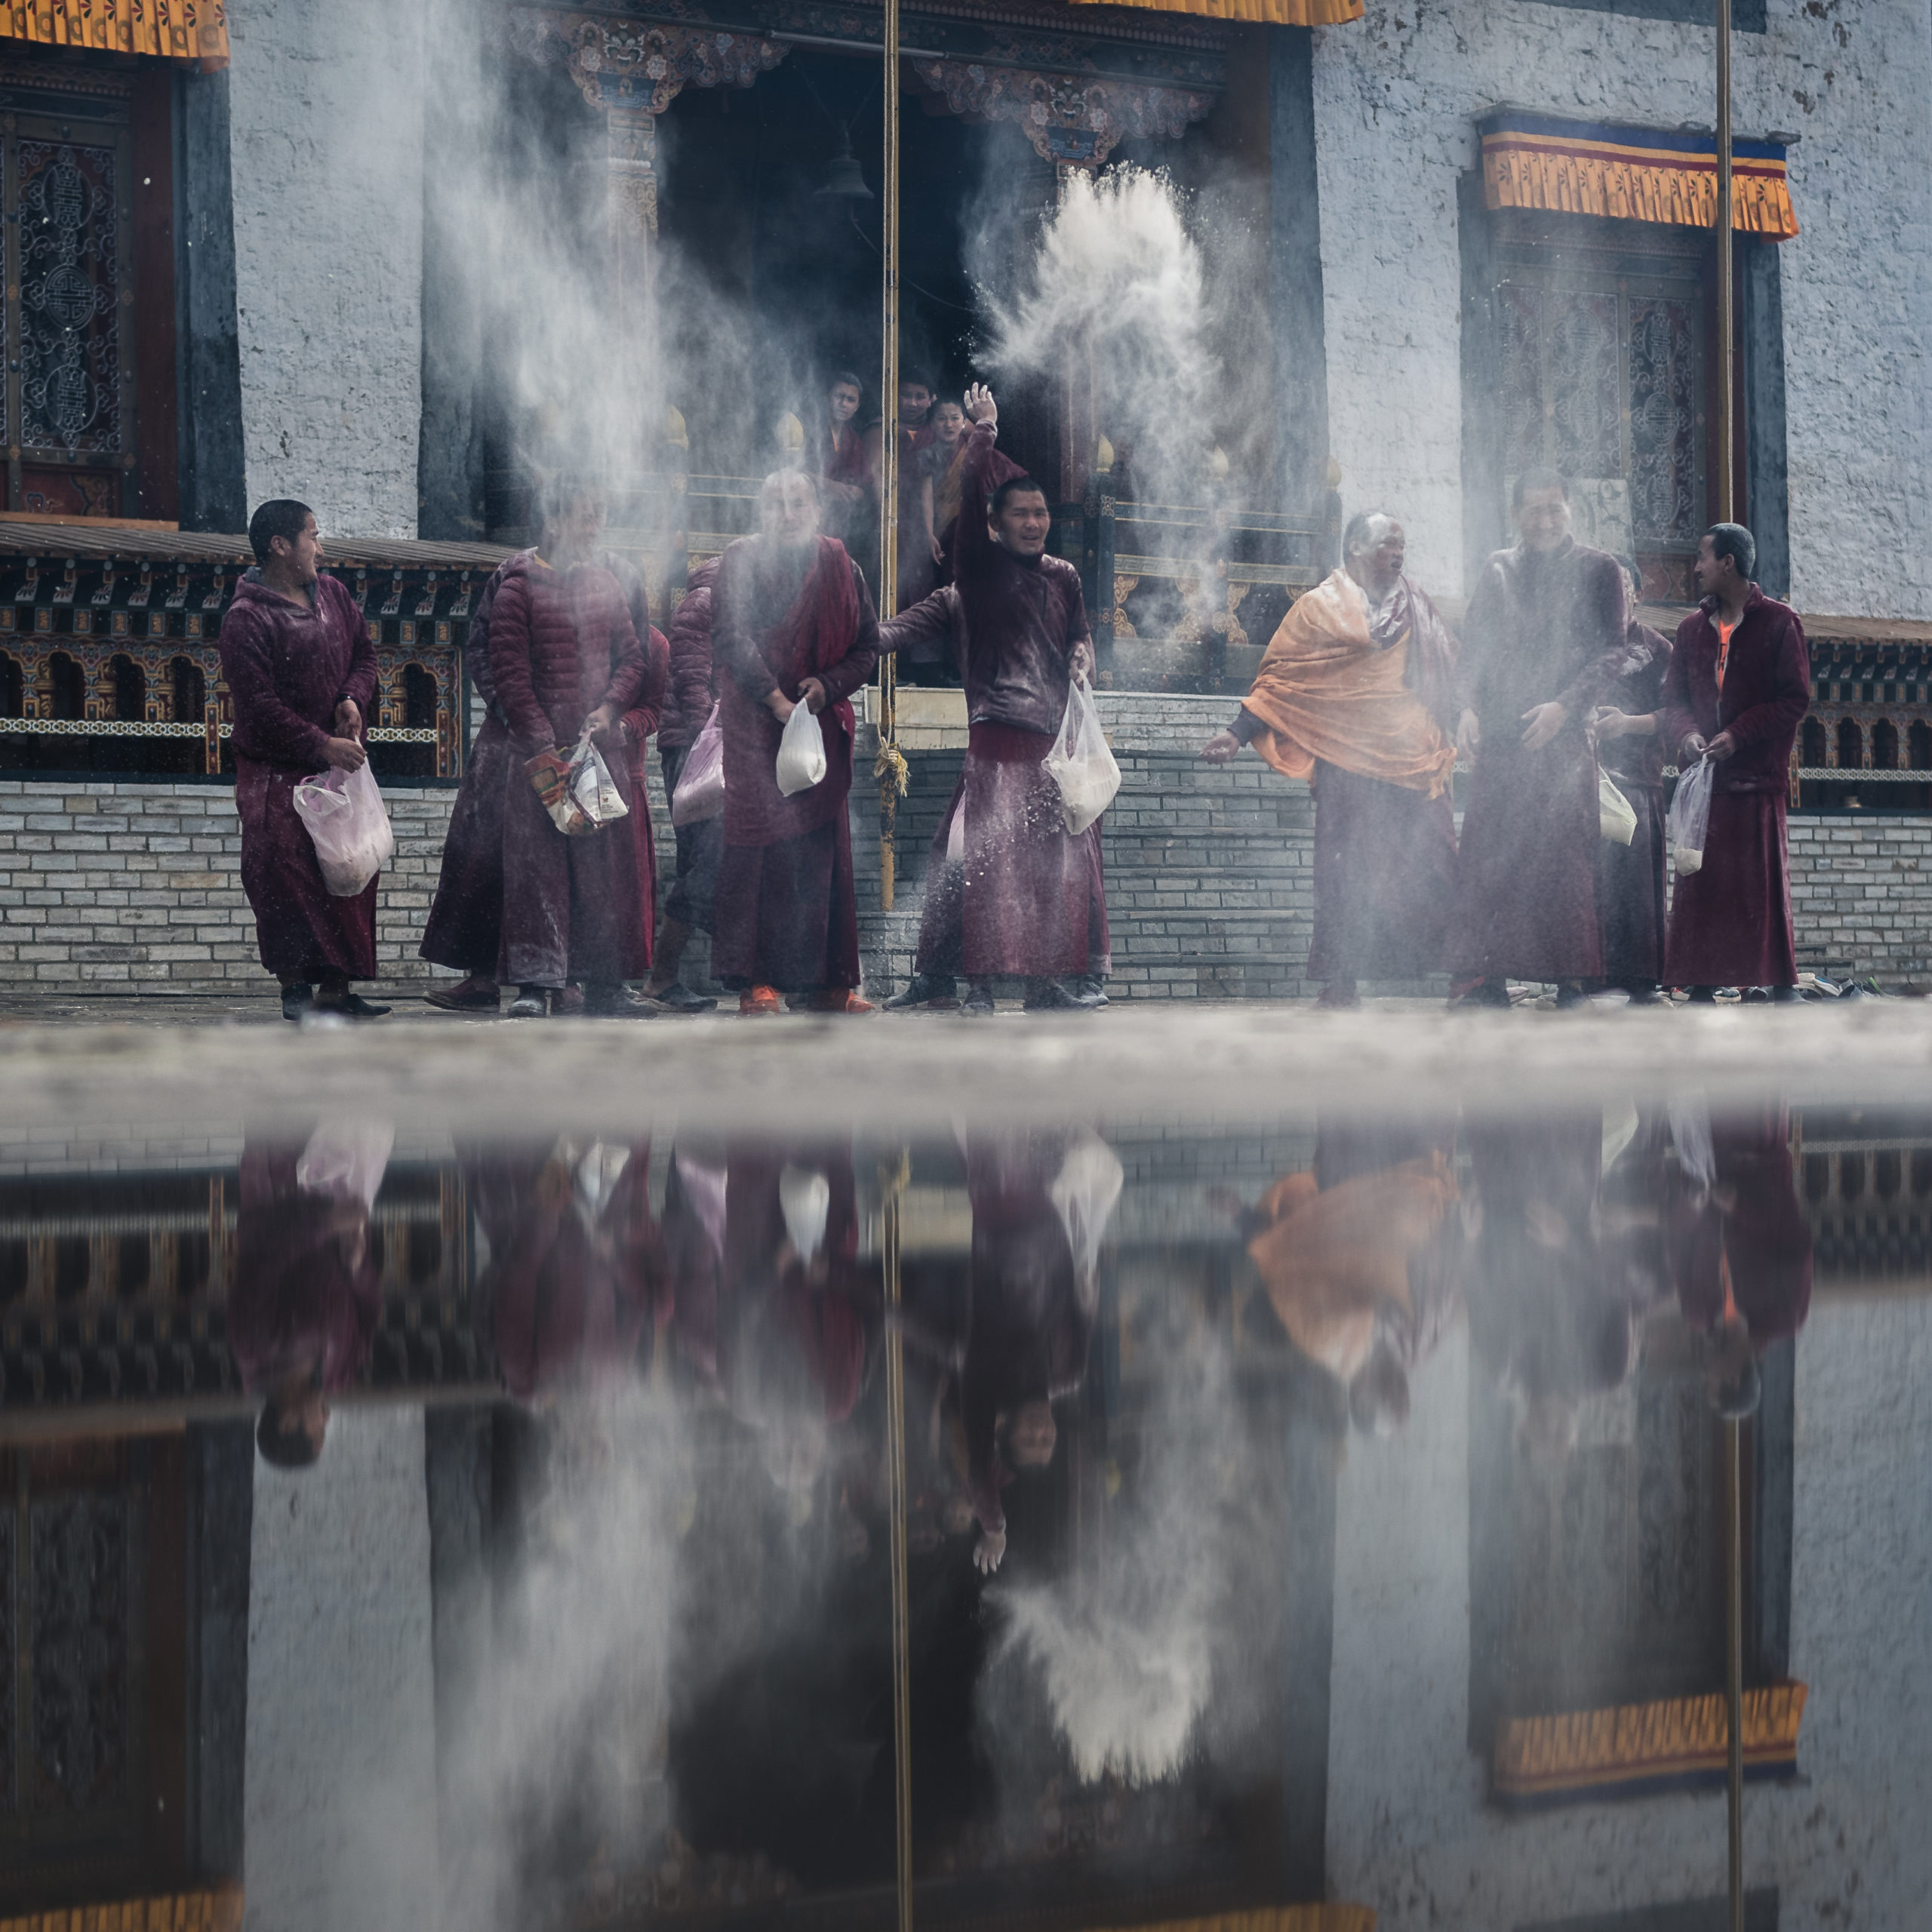 A group of Buddhist monks throwing flour into the air during the New Year celebration at a temple in Bhutan